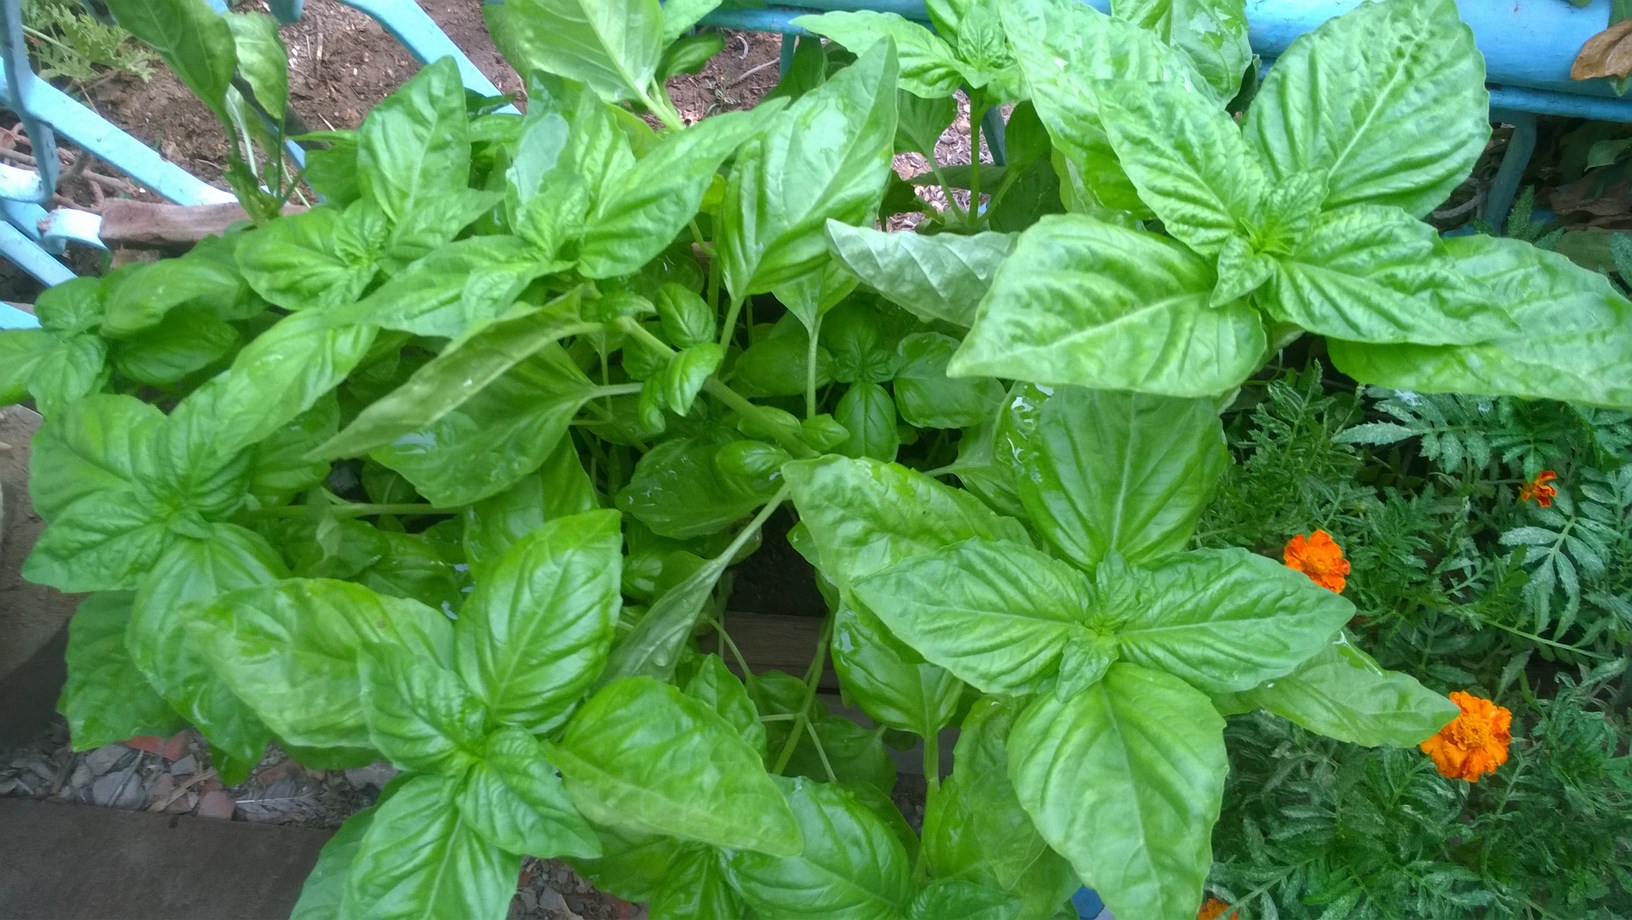 Basil is the best known of the Italian herbs and, and it is the most grown aromatic herb.